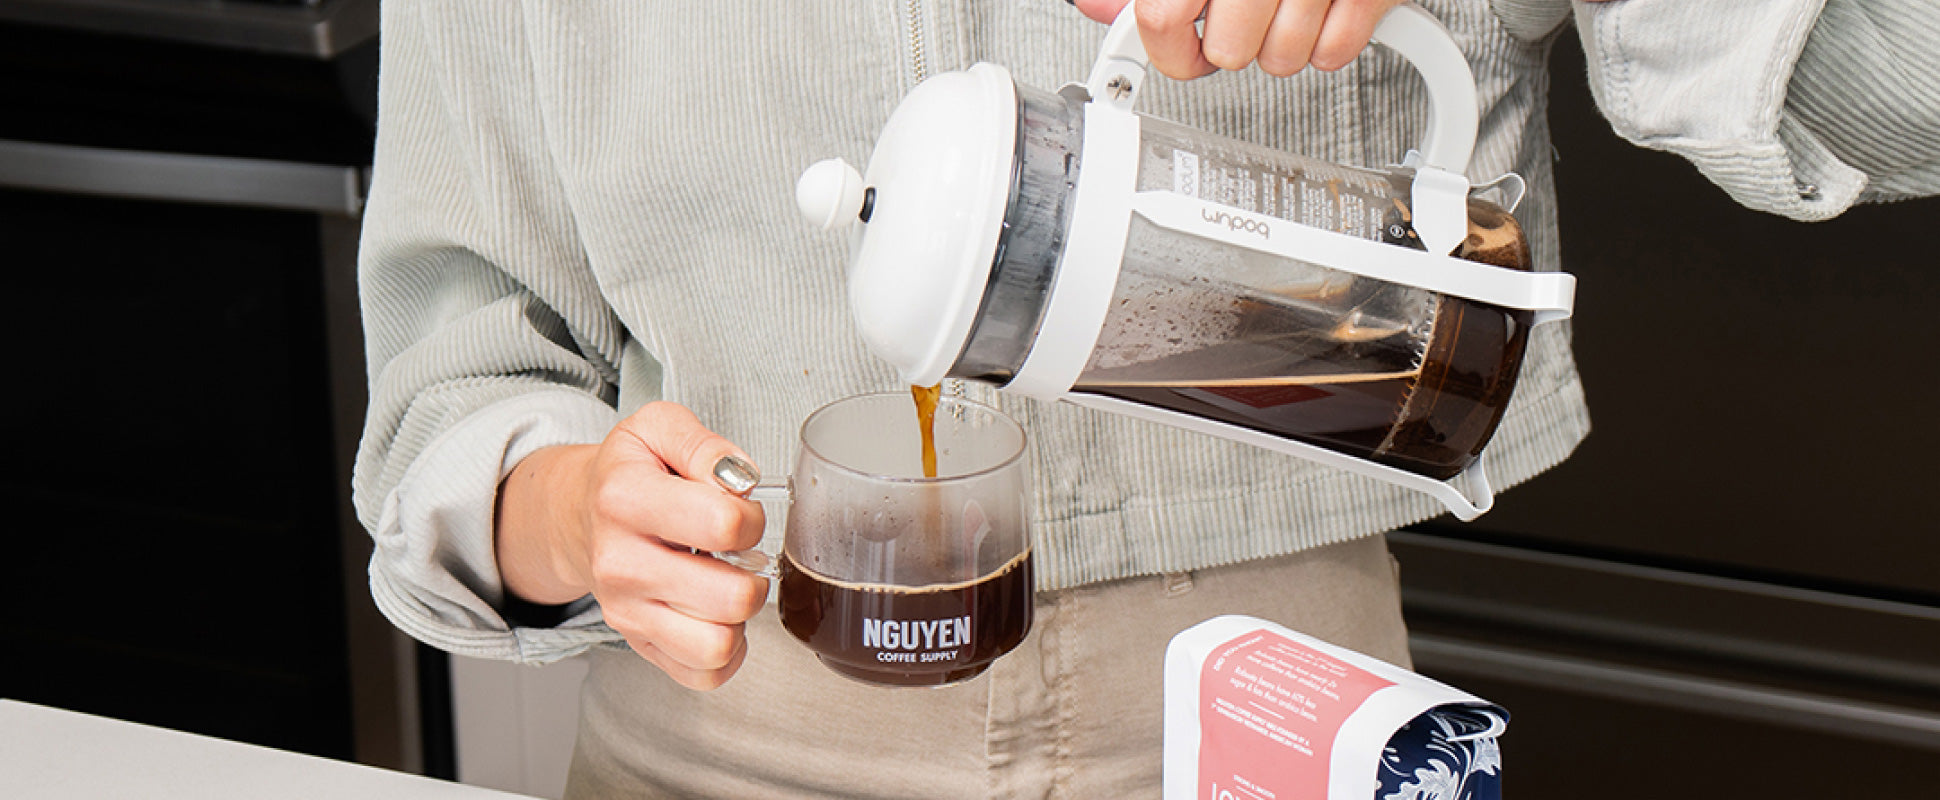 Making cold brew coffee with milk in a french press, also known as a  cafetière, coffee press, or coffee plunger Stock Photo